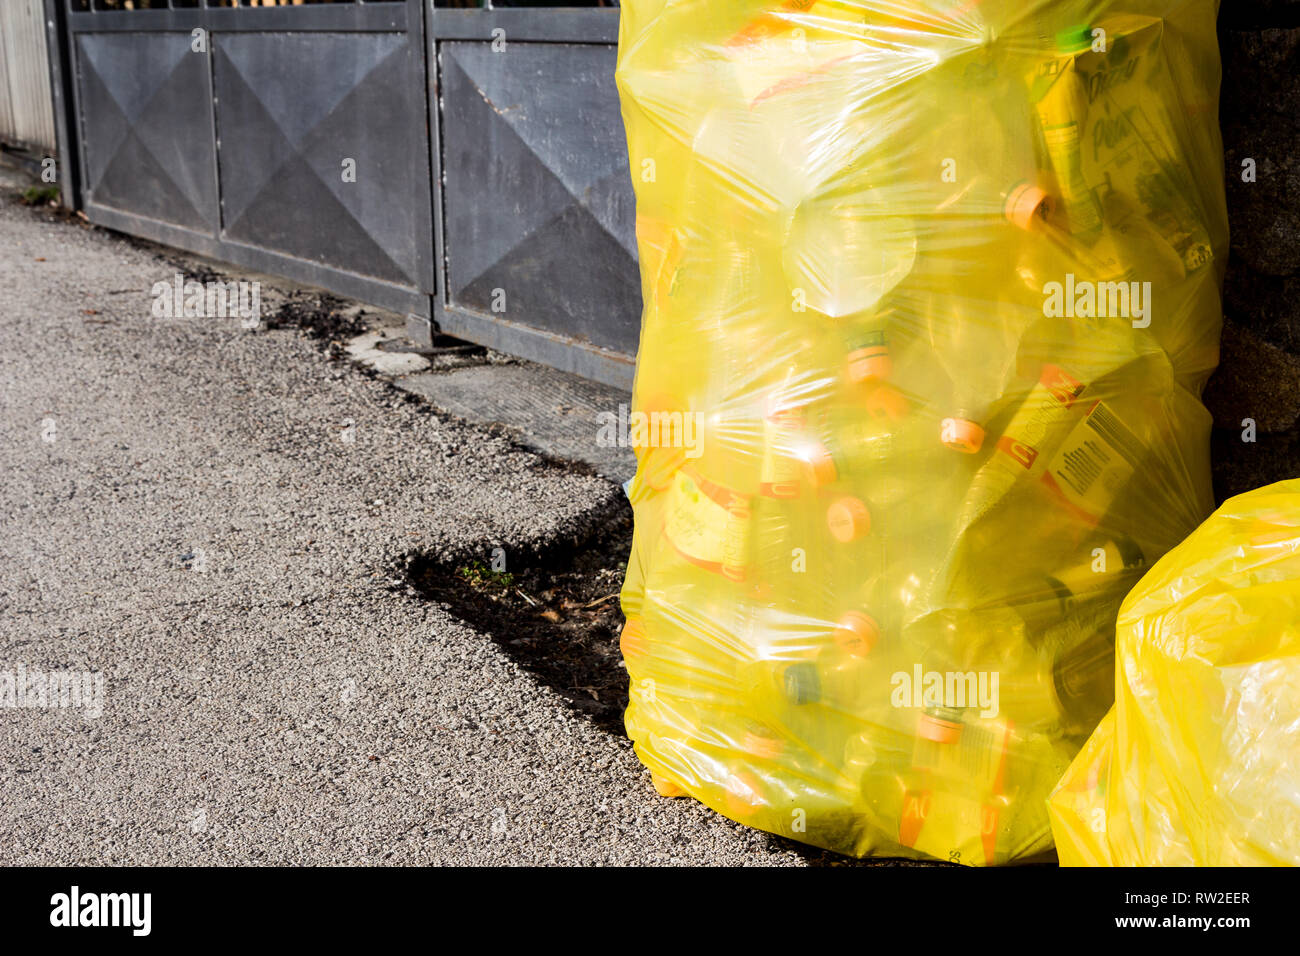 https://c8.alamy.com/comp/RW2EER/yellow-bags-of-separate-collection-of-plastic-waste-in-the-street-RW2EER.jpg